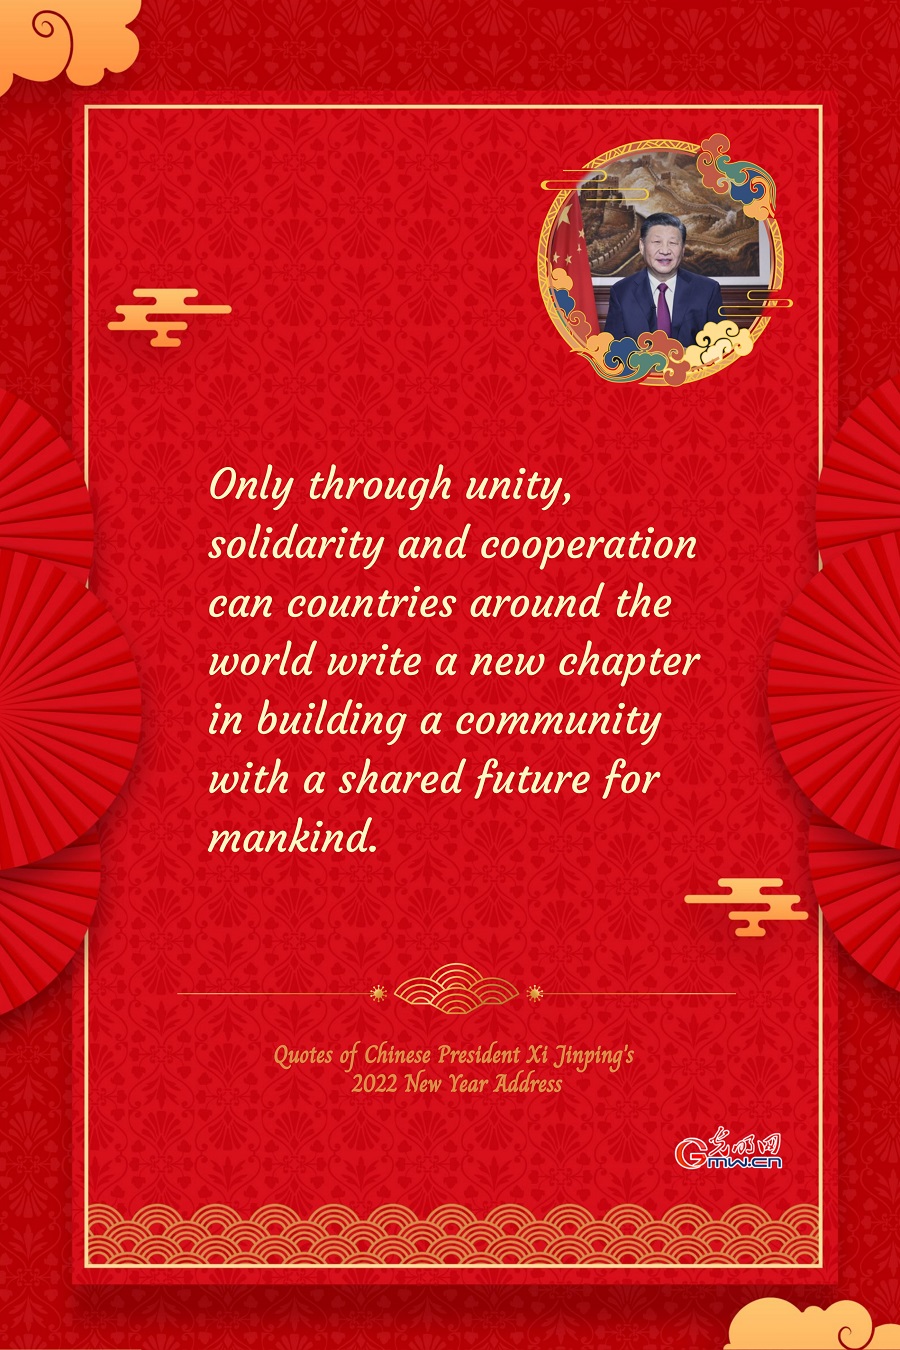 Key quotes of Xi's 2022 New Year Address: Working together for a shared future